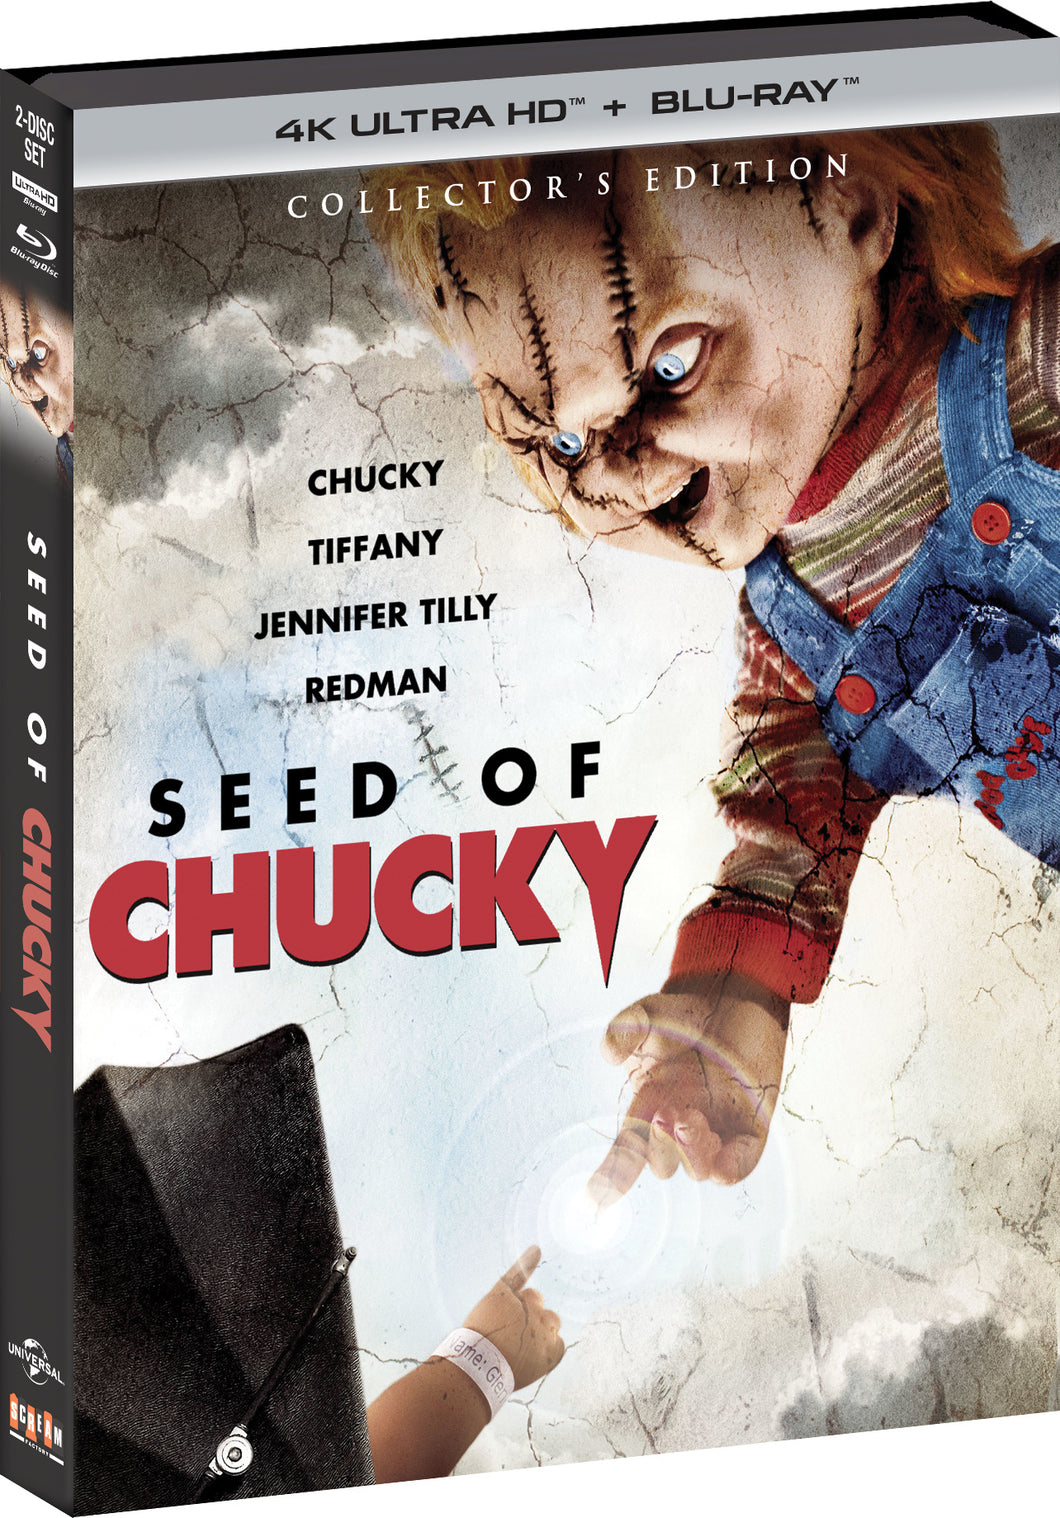 Seed of Chucky 4K Blu-ray - front cover